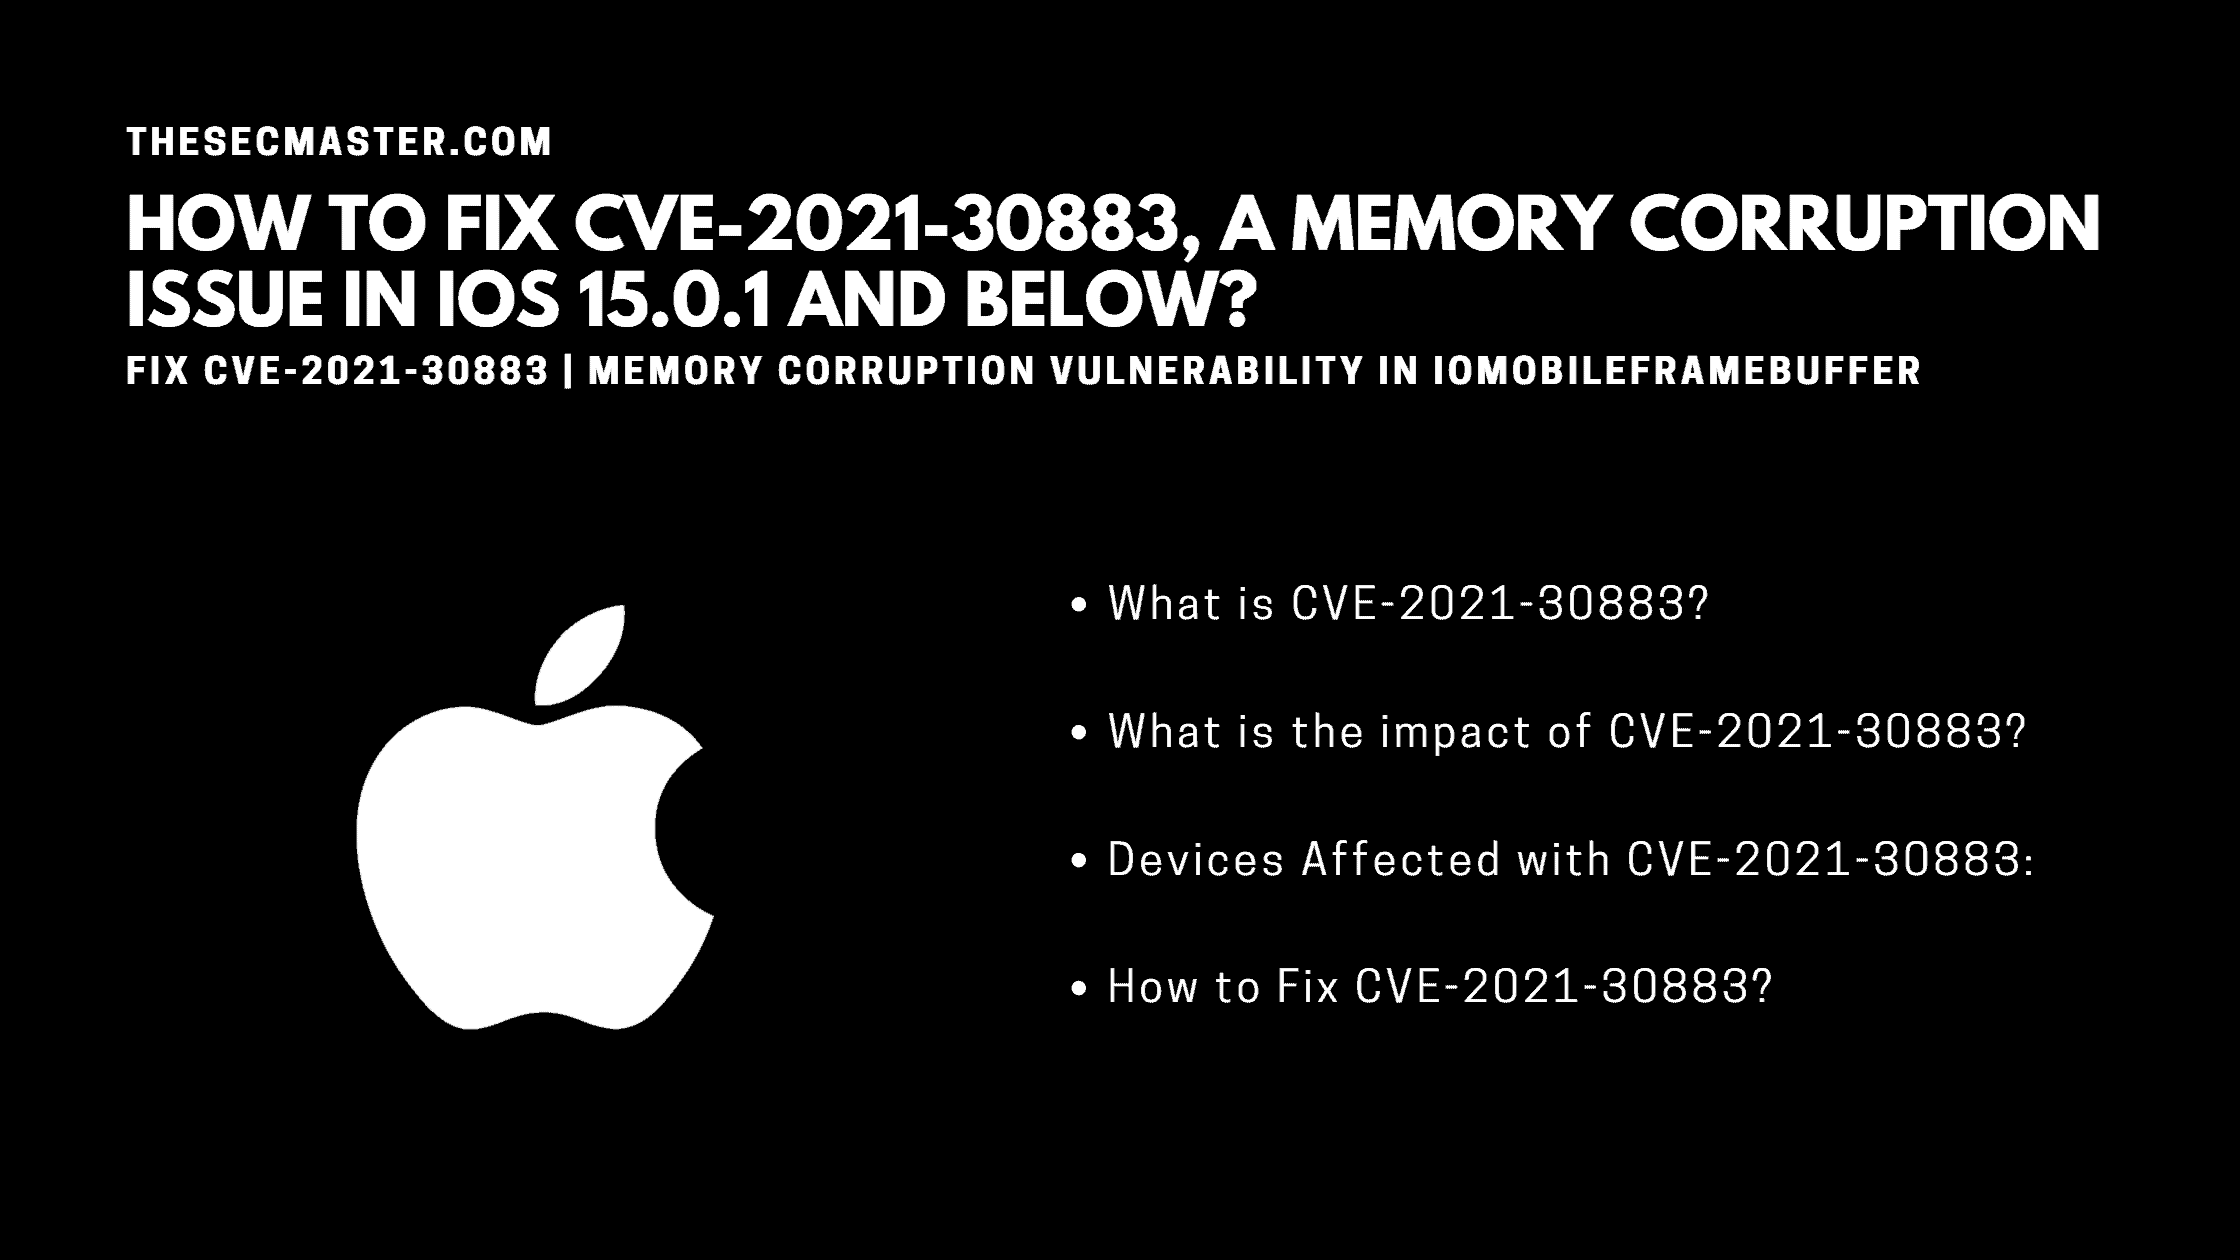 How To Fix Cve 2021 30883 A Memory Corruption Issue In Ios 15 0 1 And Below